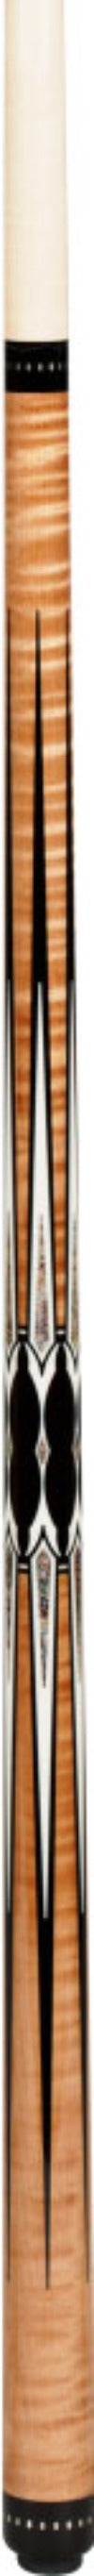 PL-23 Limited Edition Pool Cue -Pechauer